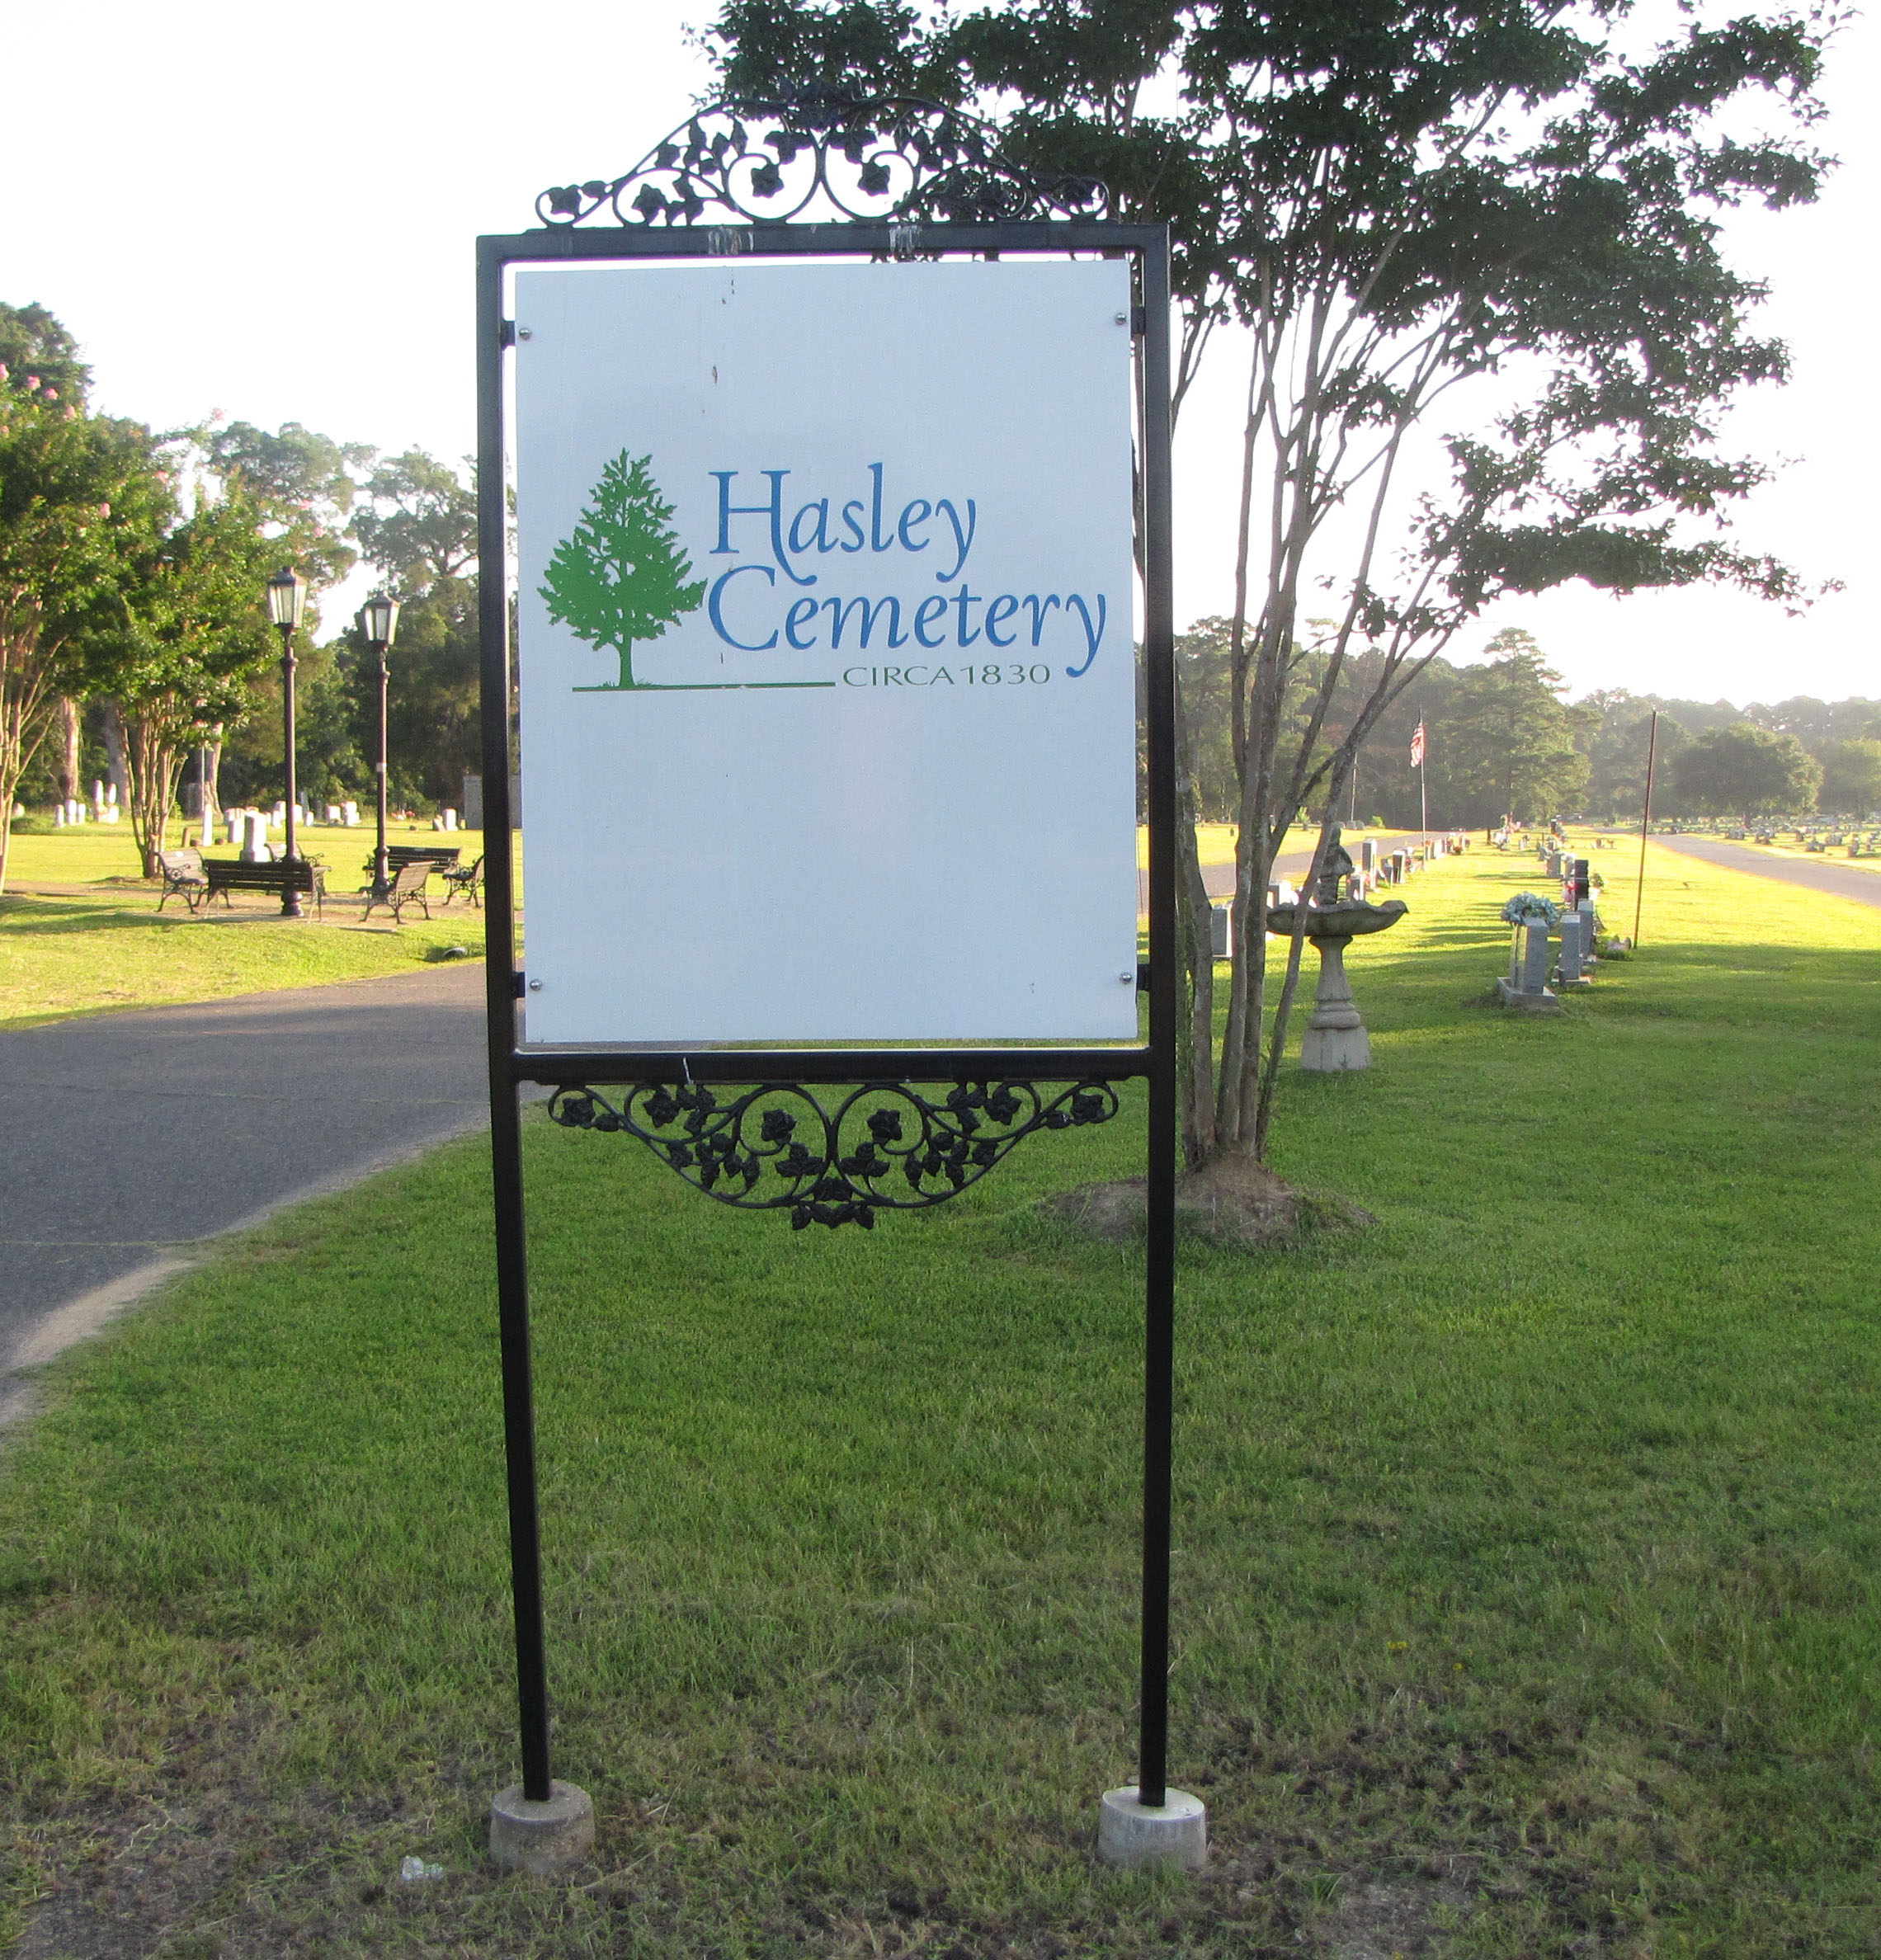 This is the middle main entrance to Hasley Cemetery with a sign on a green lawn.